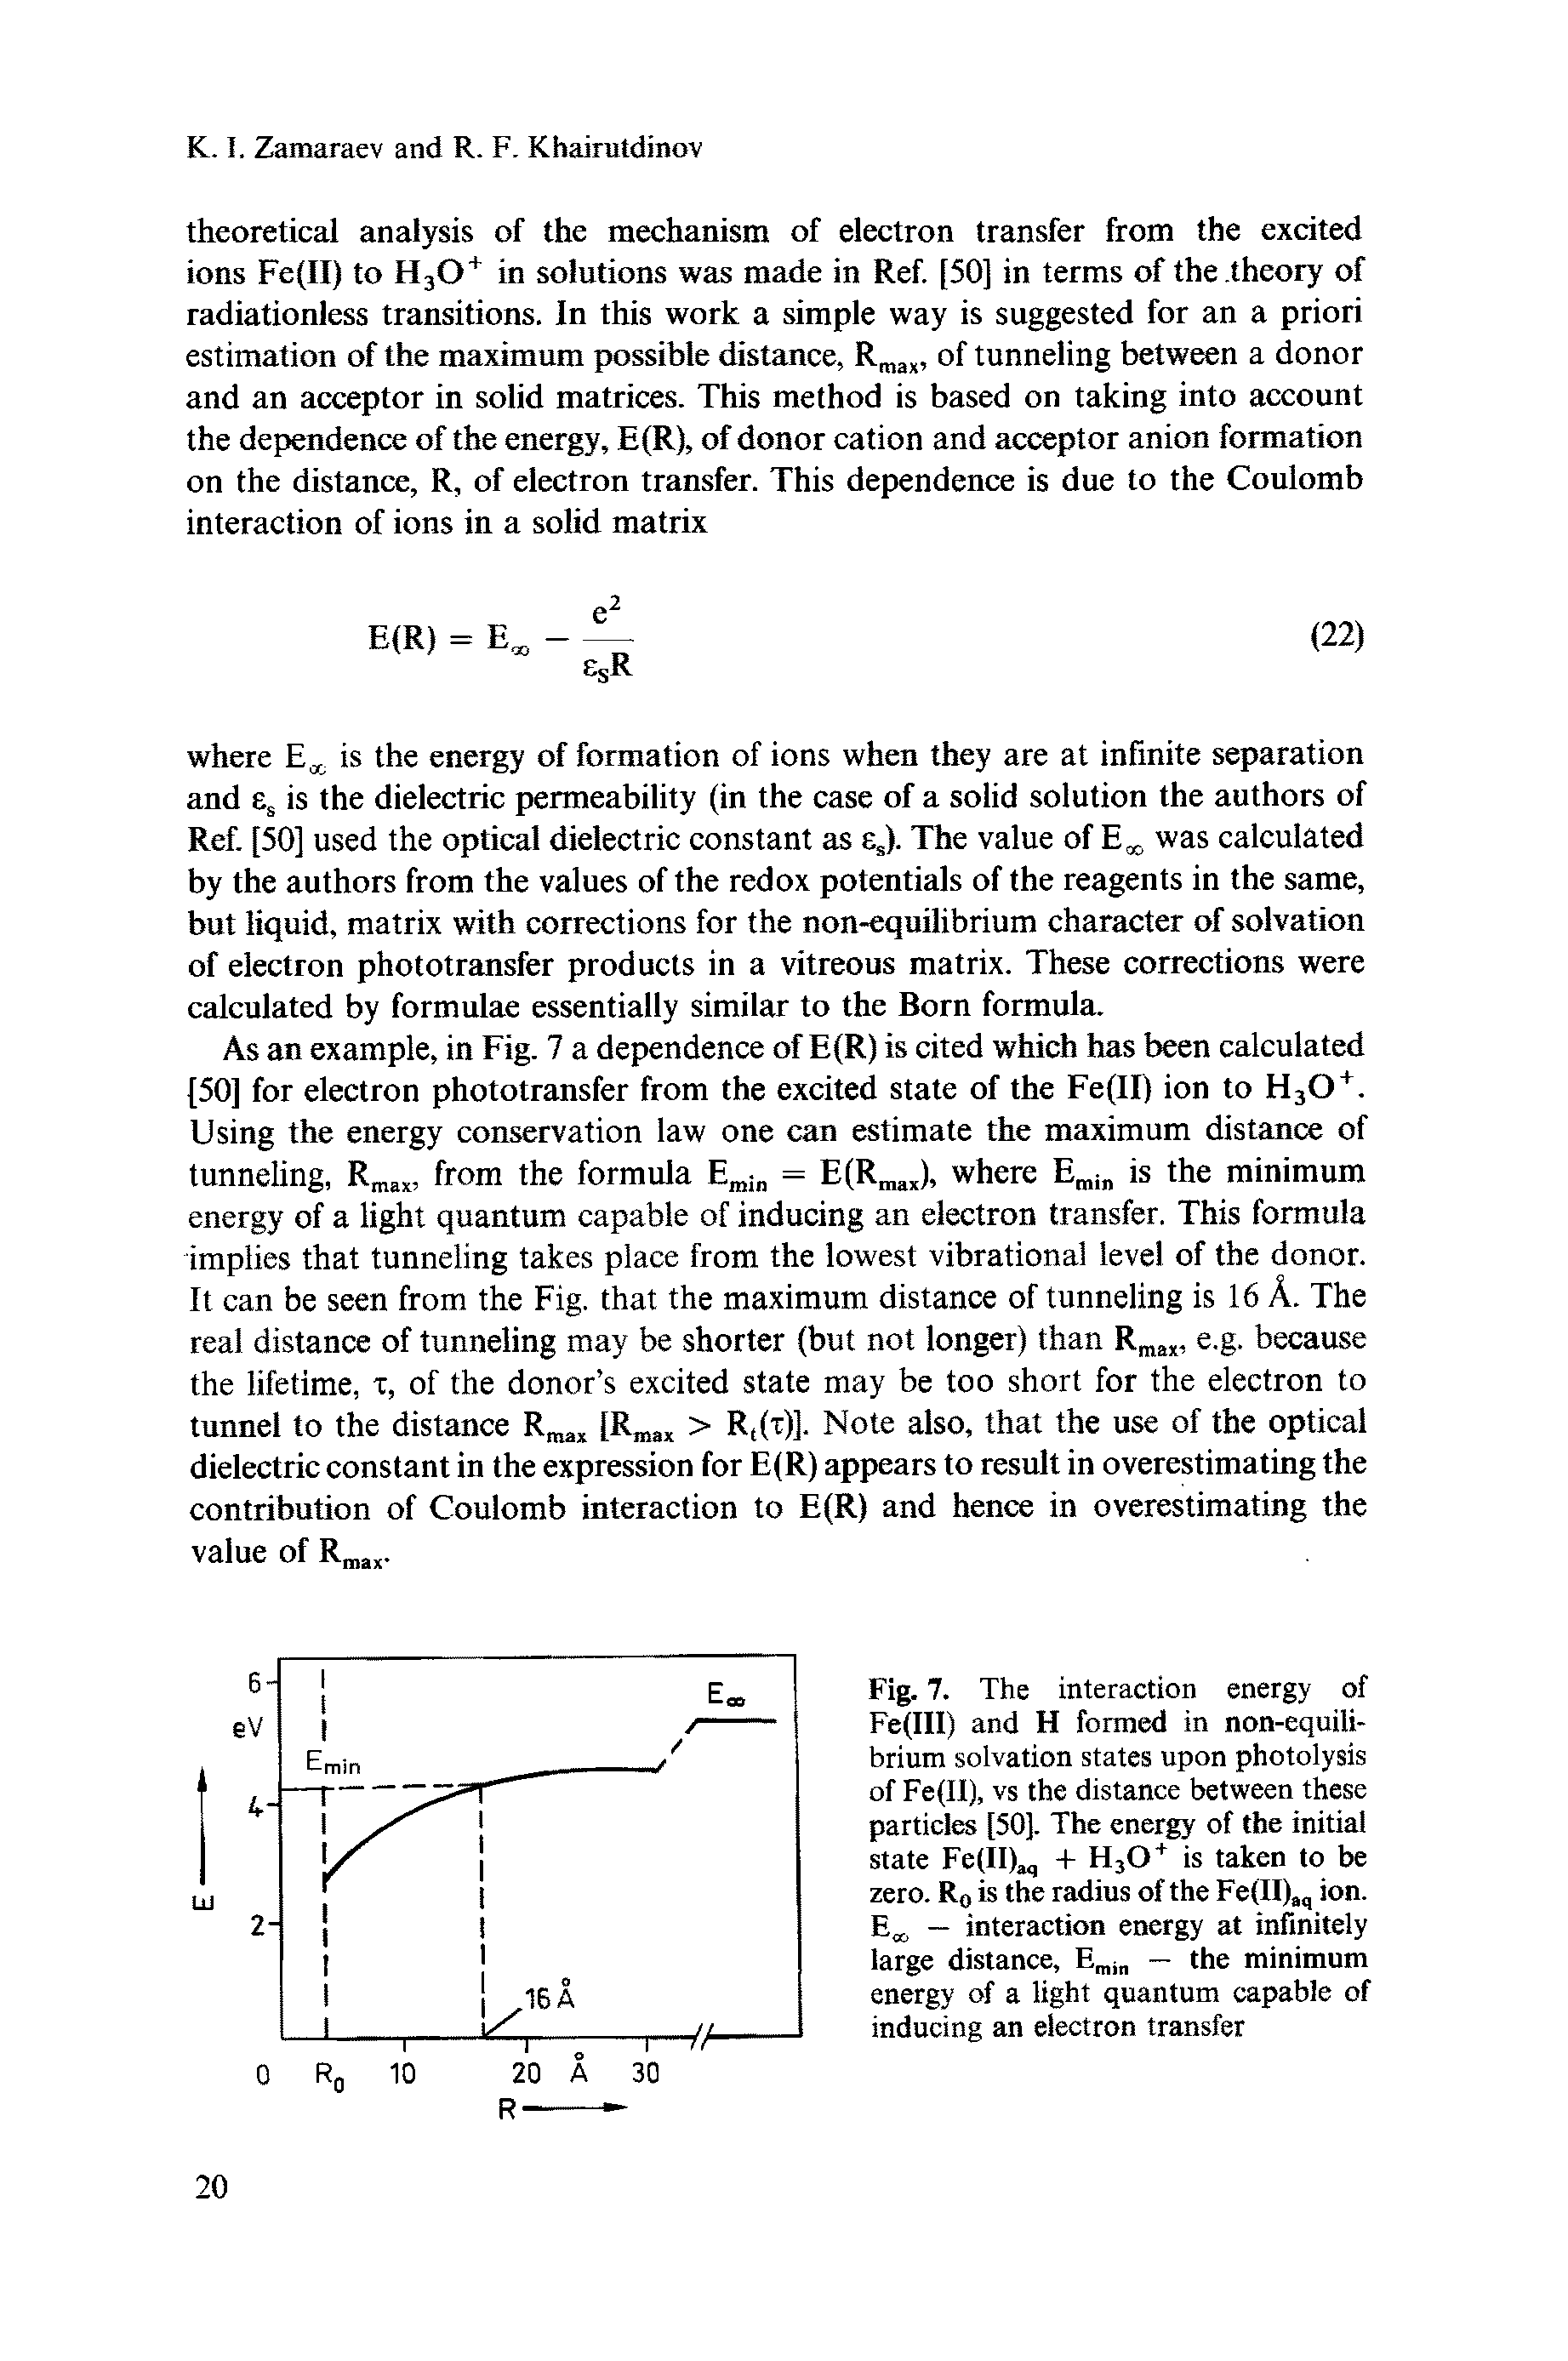 Fig. 7. The interaction energy of Fe(III) and H formed in non-equilibrium solvation states upon photolysis of Fe(II), vs the distance between these particles [50]. The energy of the initial state Fetllhq + H30+ is taken to be zero. R0 is the radius of the Fe(II)aq ion. E,x — interaction energy at infinitely large distance, Emjn — the minimum energy of a light quantum capable of inducing an electron transfer...